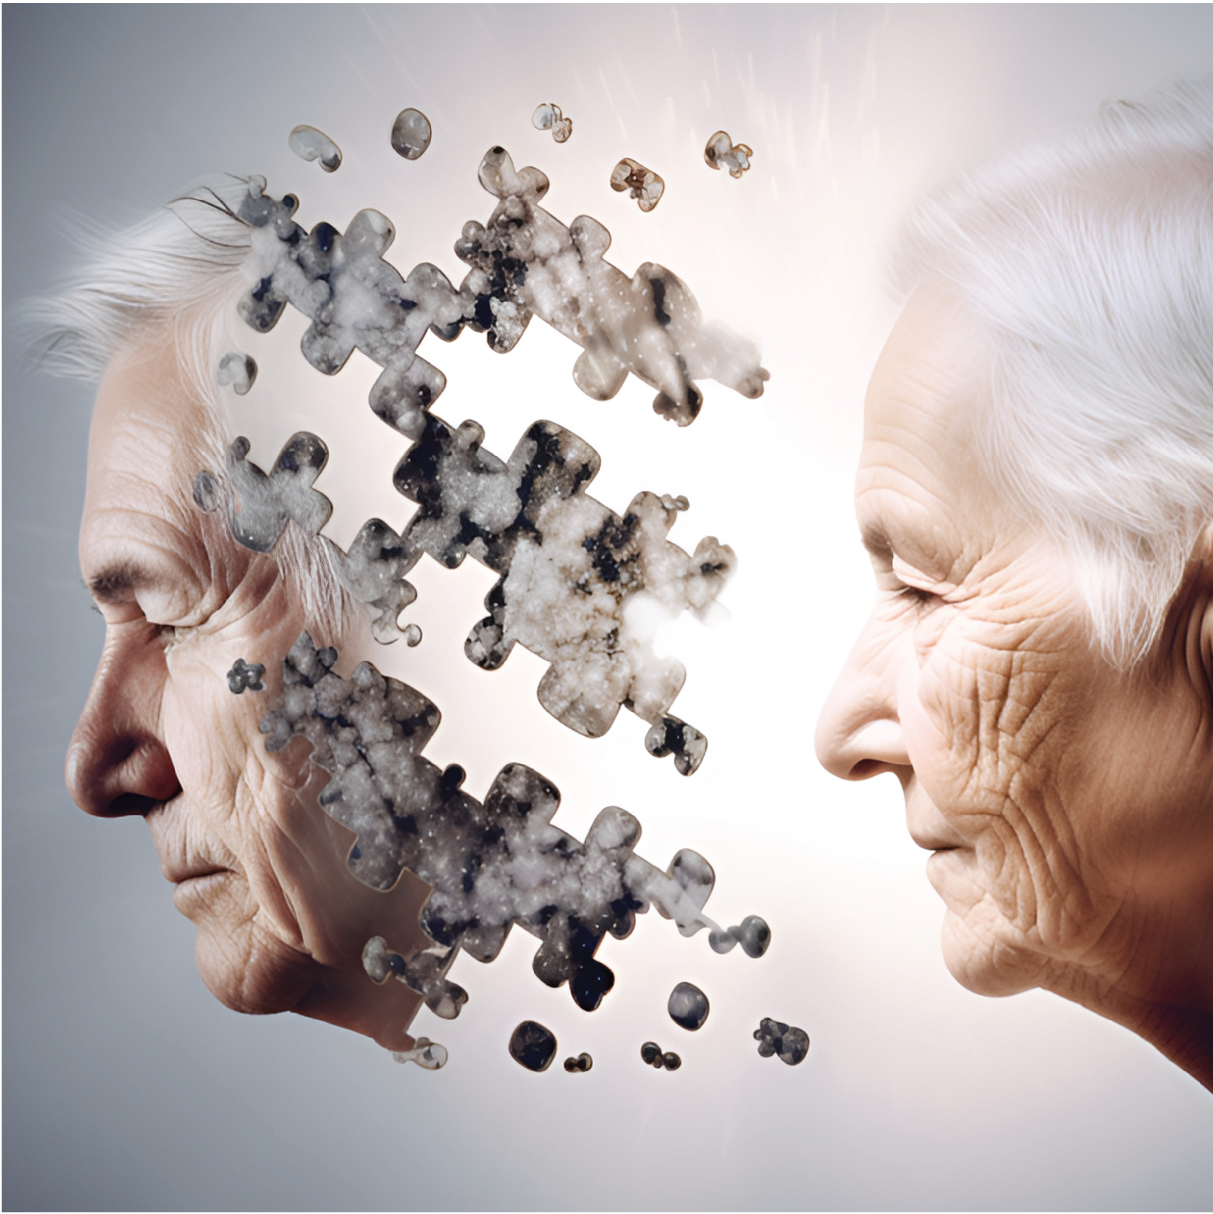 Alzheimer's Disease: Recognizing Early Warning Signs 